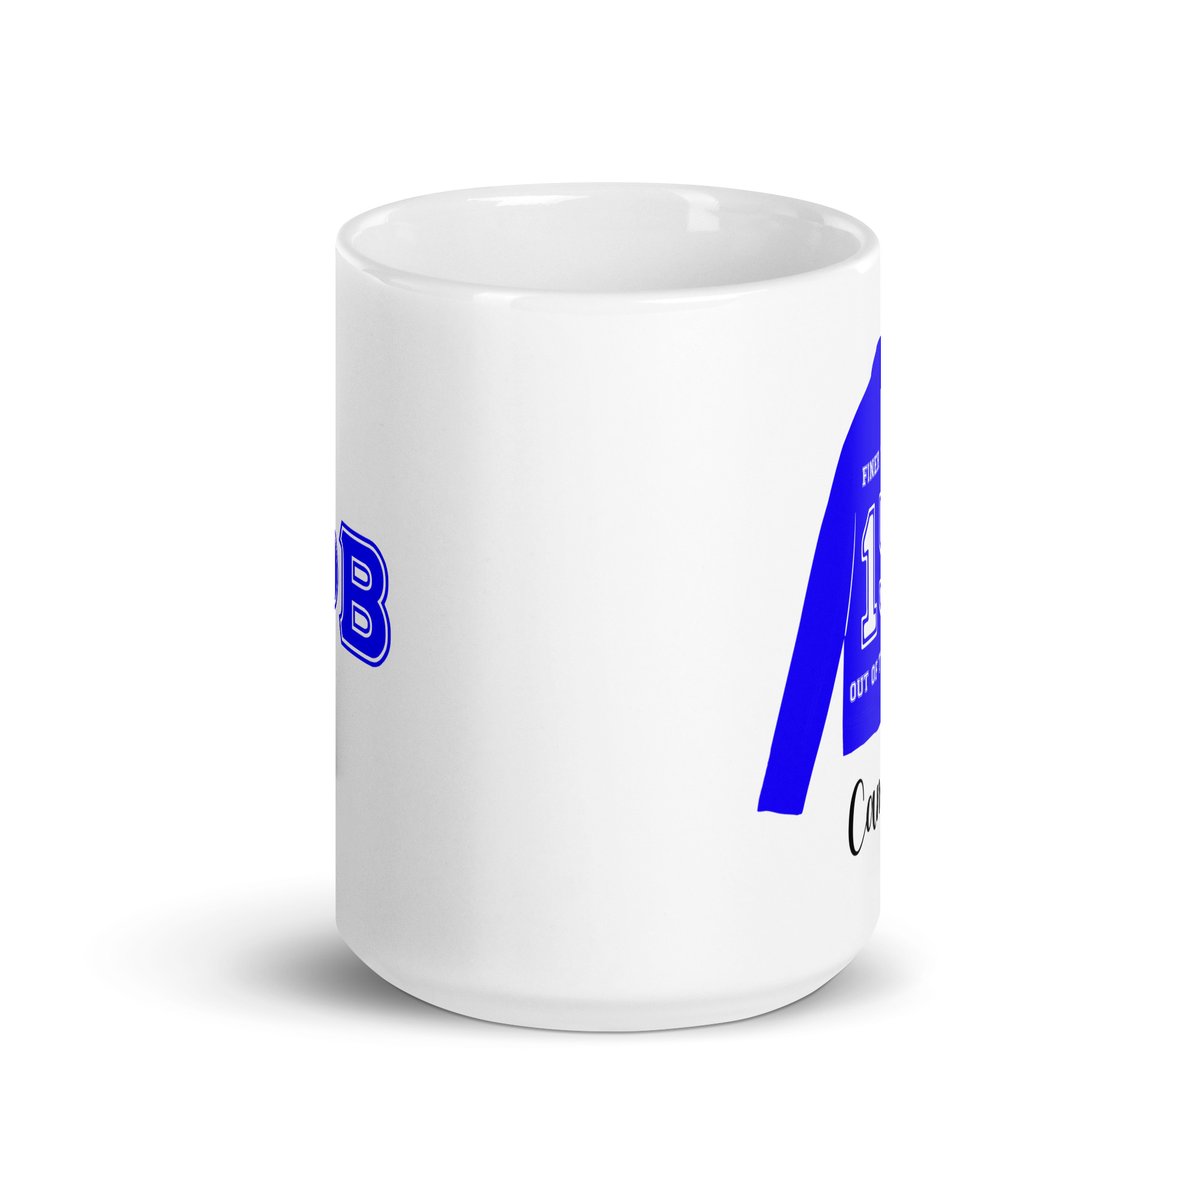 Our new custom line jacket mugs are on sale! Get 25% off with code: Cyber25 . Hurry! Sale ends Monday night! 

Zeta Phi Beta Personalized White Glossy Mug - Two Sizes Available https://t.co/5tRxwgmbfY via @Etsy 
#zetaphibeta #zphib #sorors #divine9  #CyberMonday 